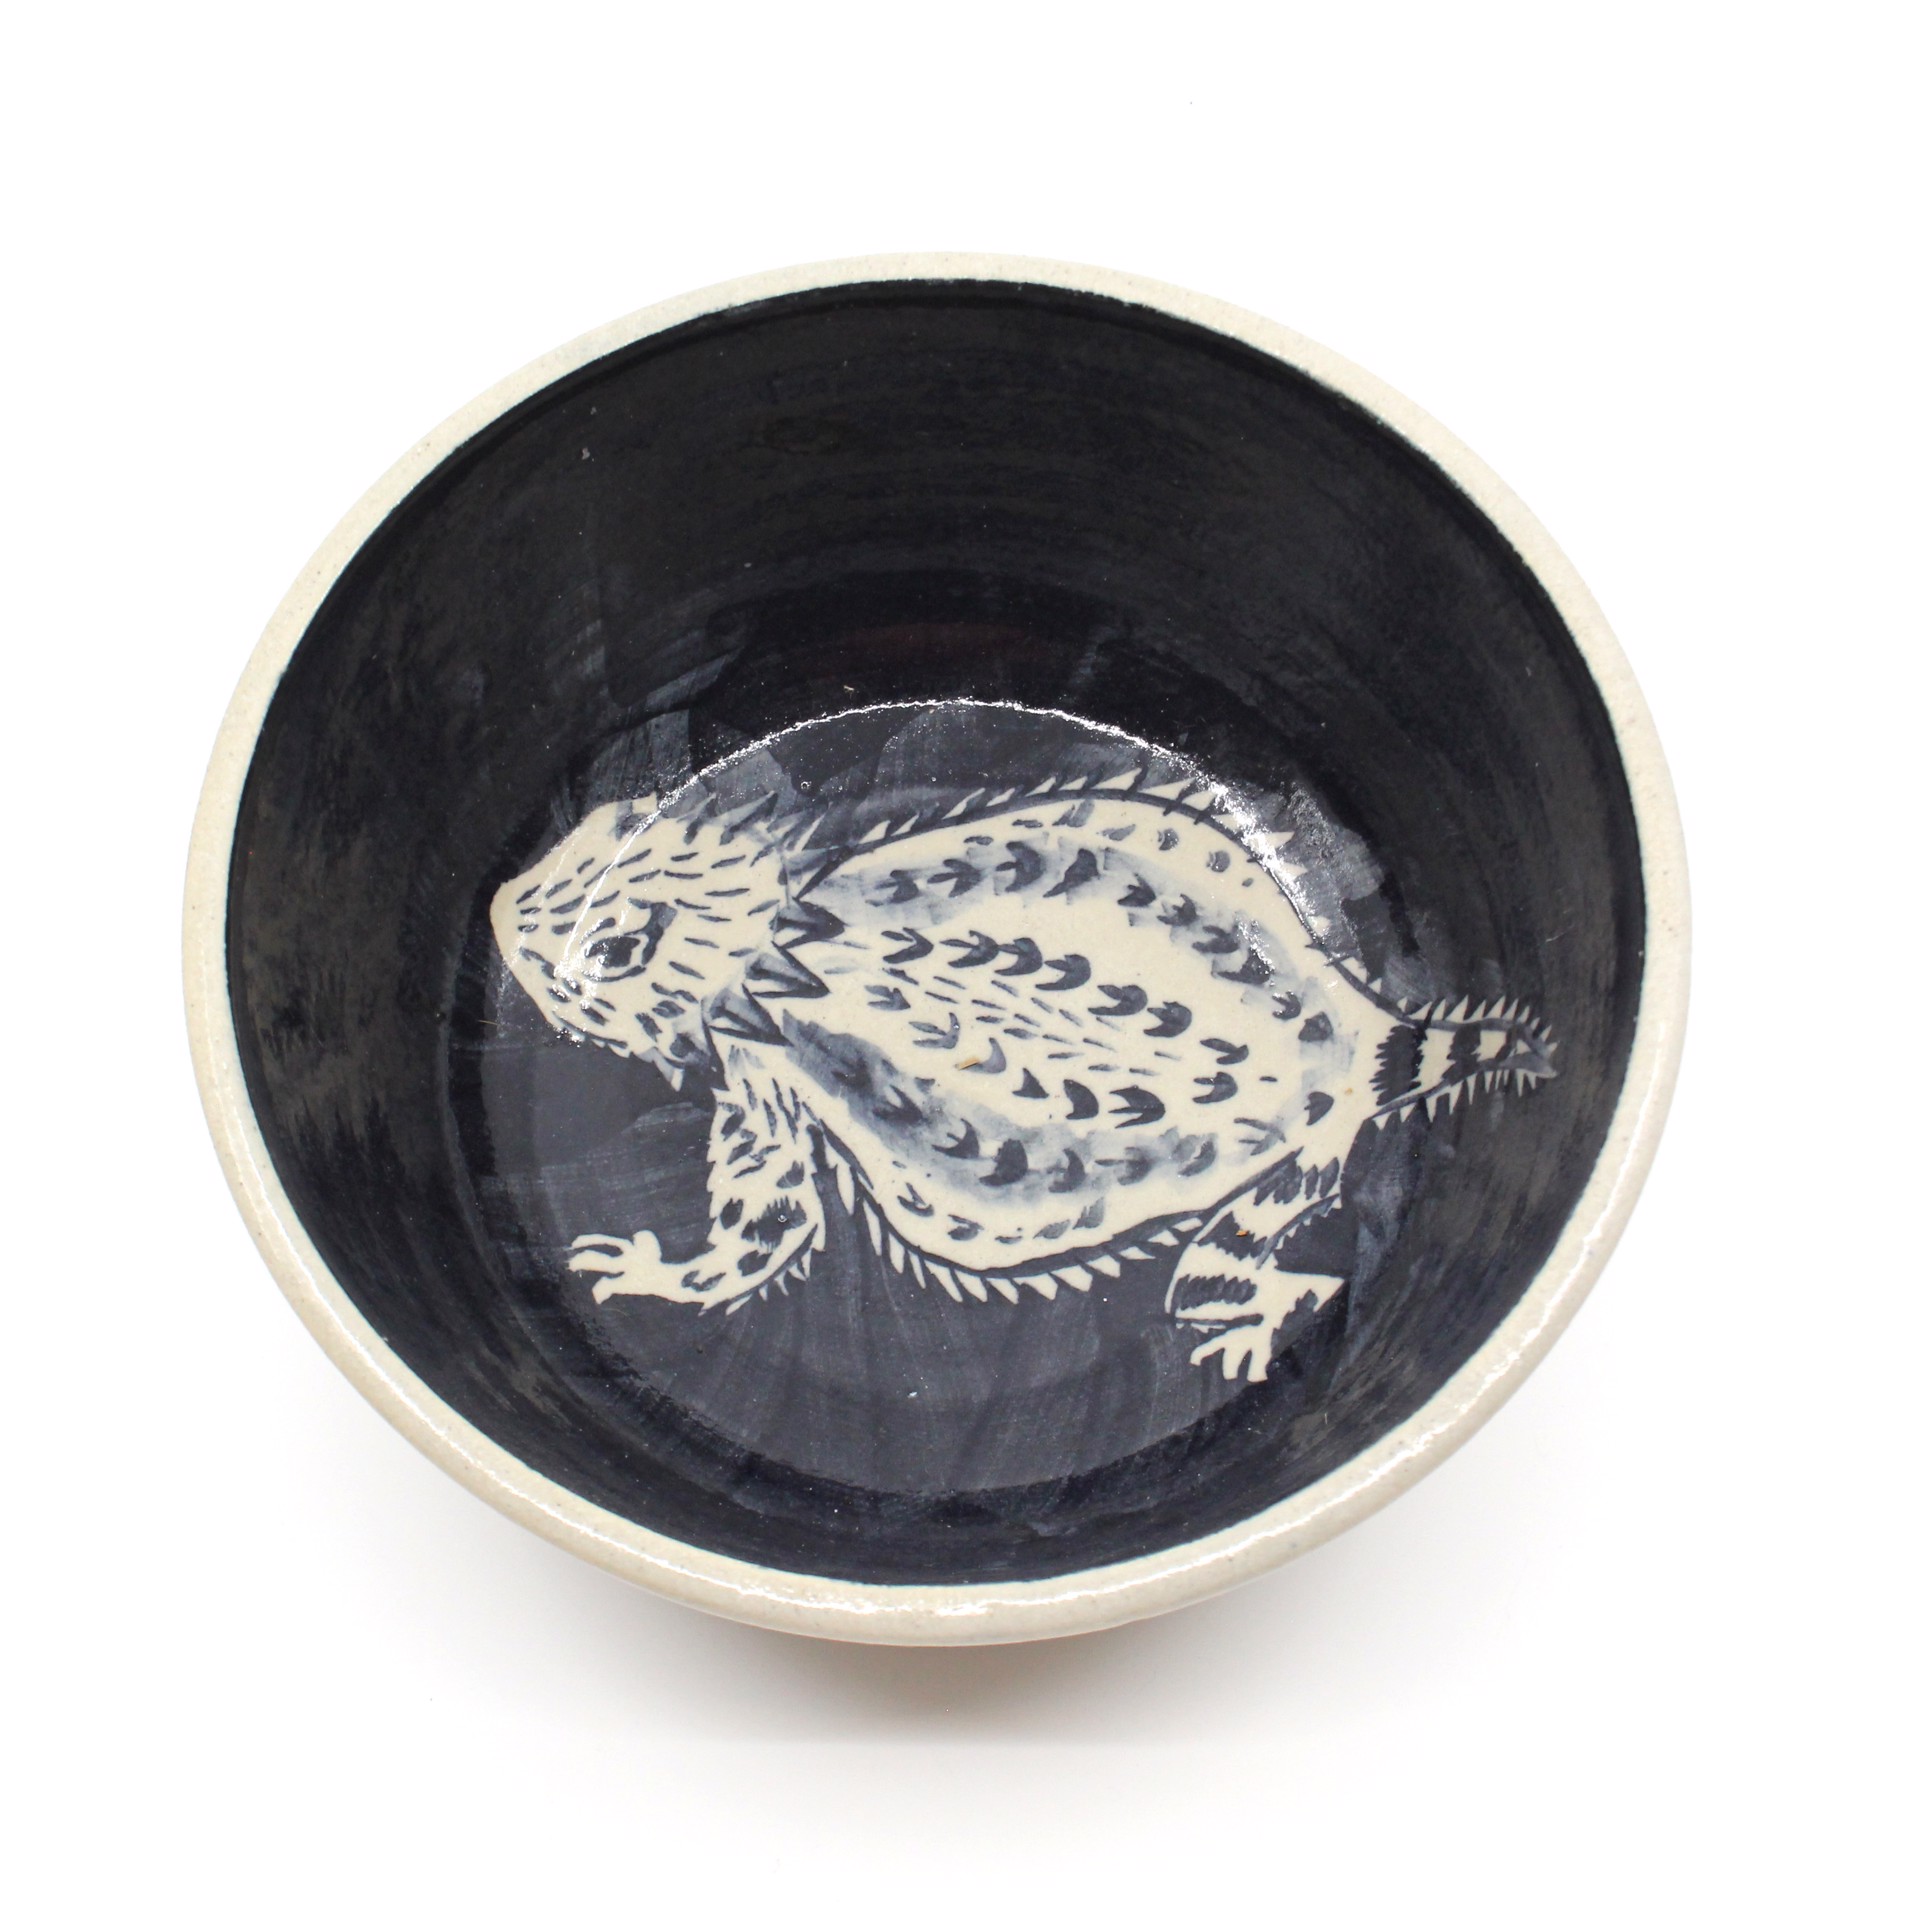 Horned Toad Bowl by Kat Kinnick